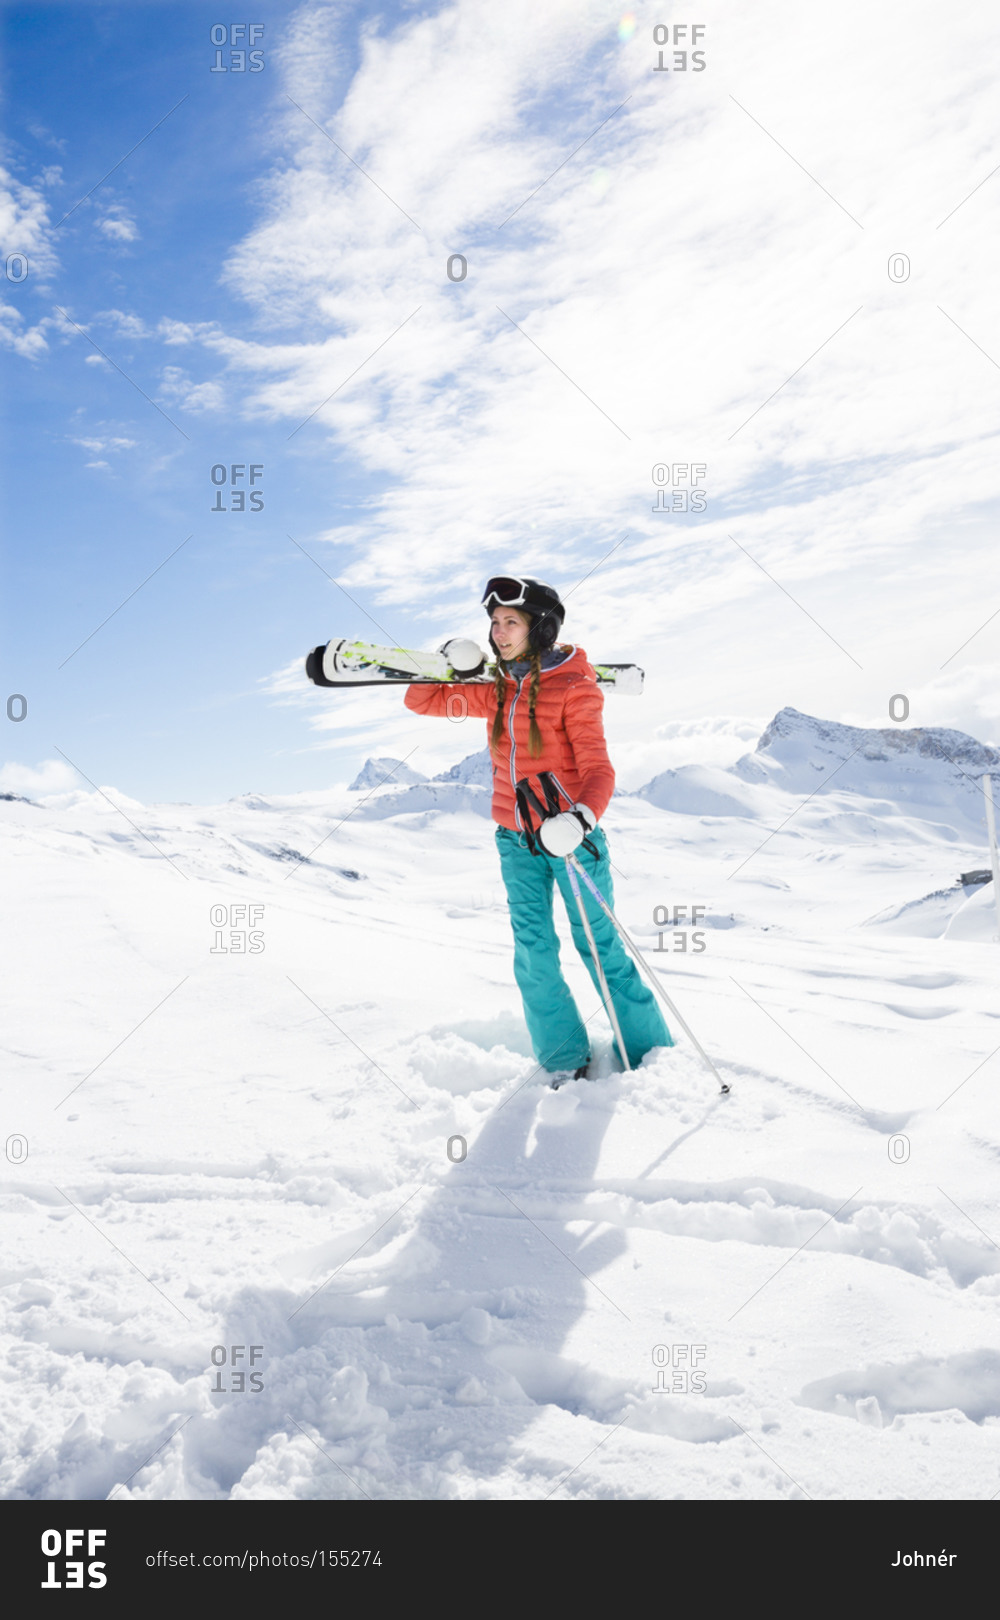 Woman carrying skis and poles stock photo - OFFSET